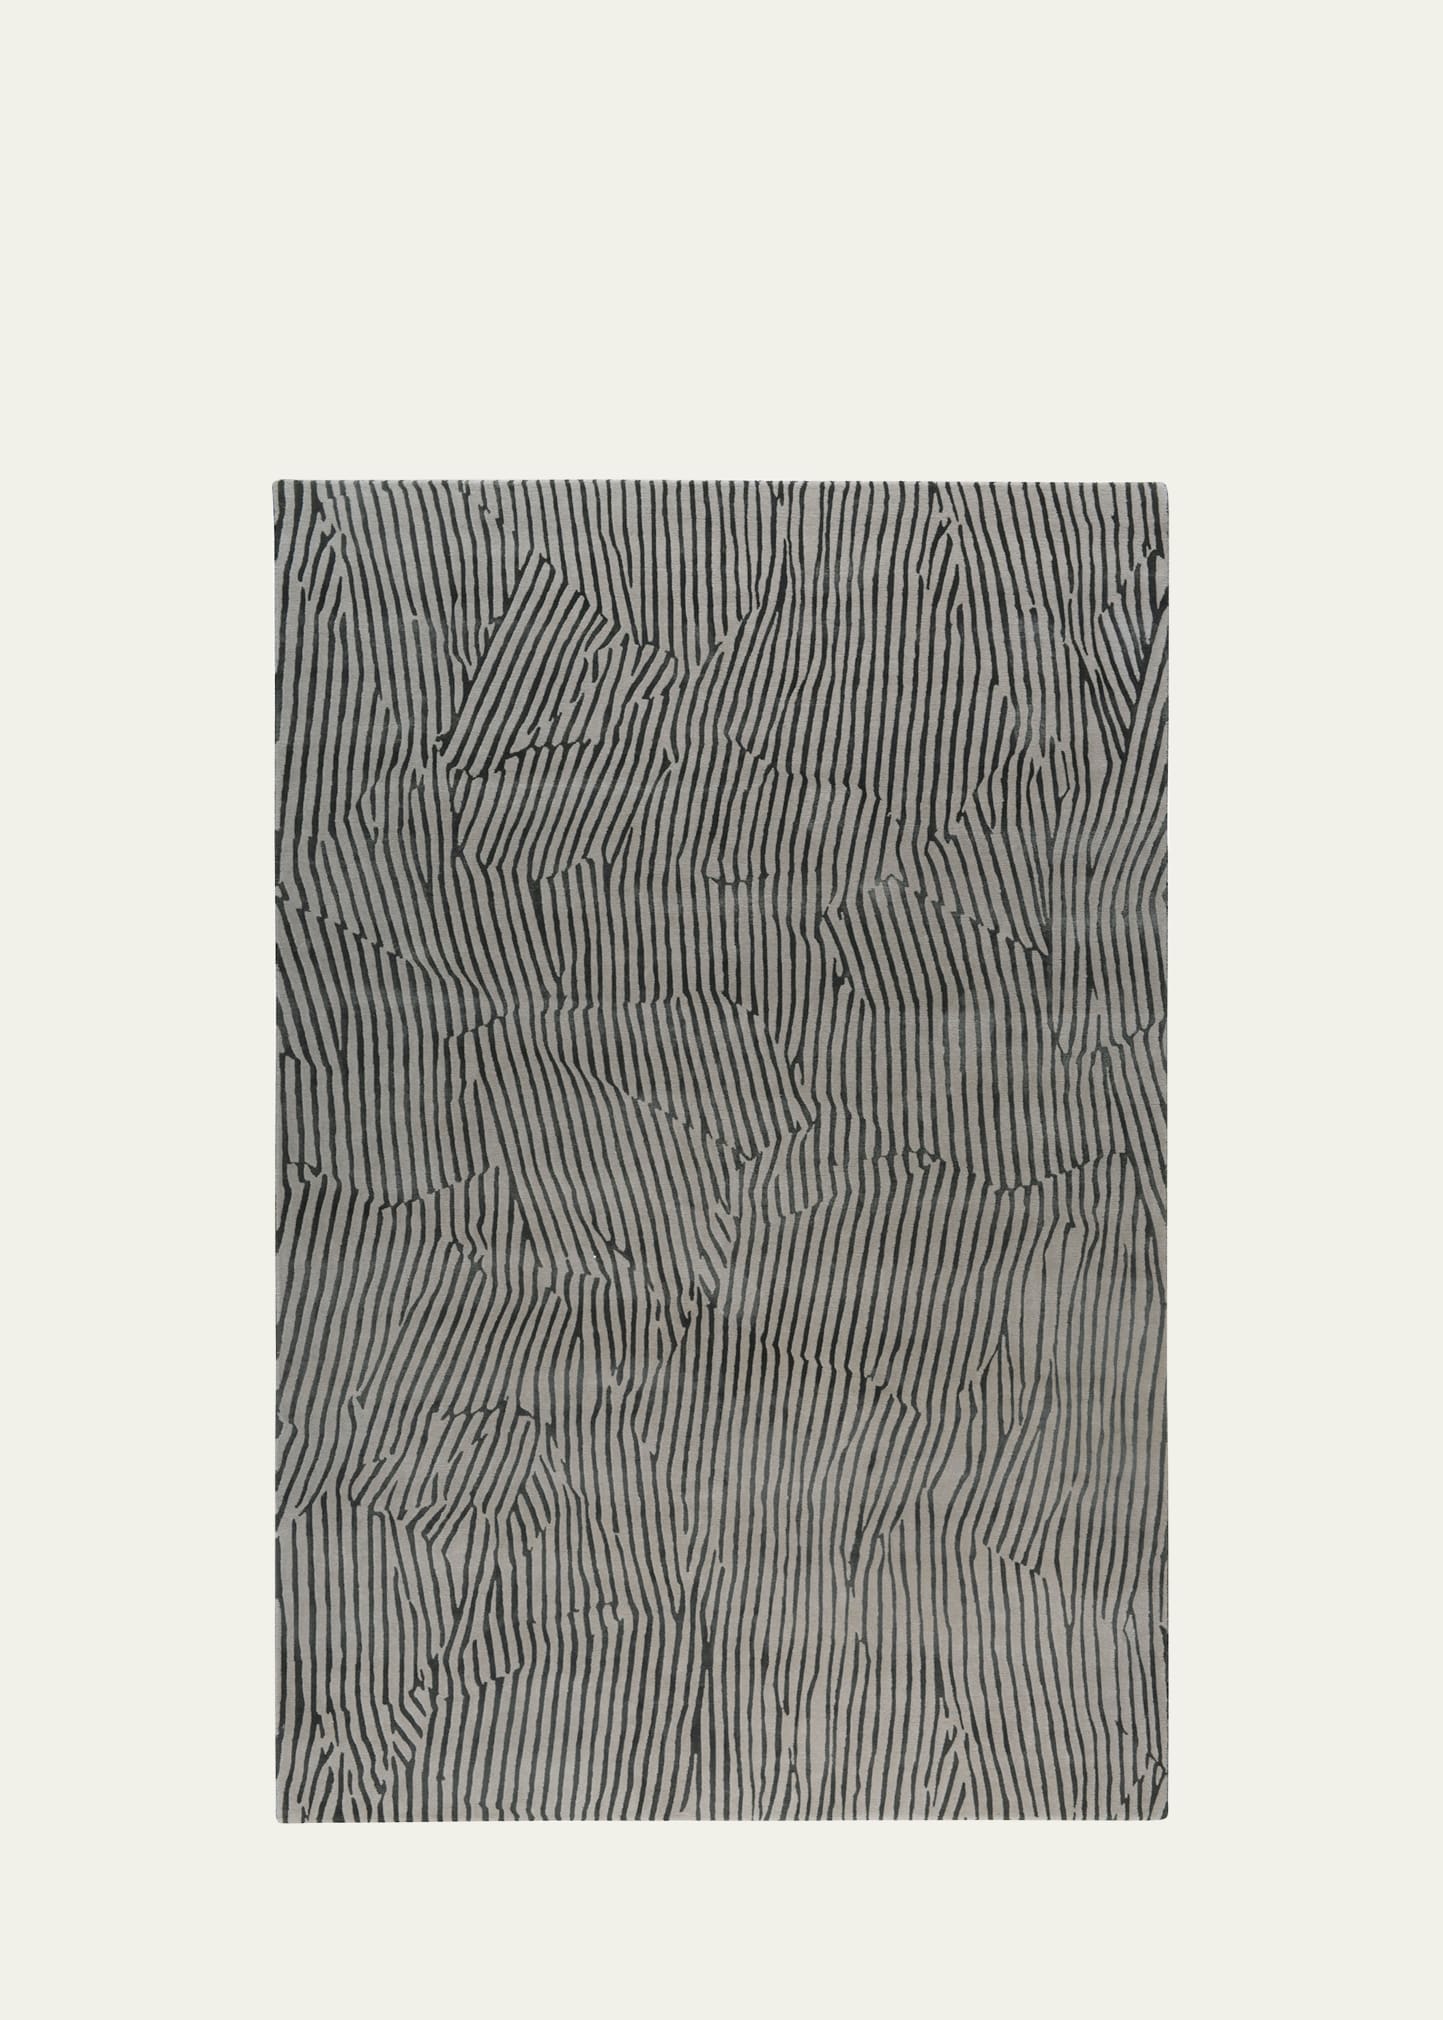 The Rug Company X Kelly Wearstler Avant Graphite Hand-knotted Rug, 9' X 12' In Gray